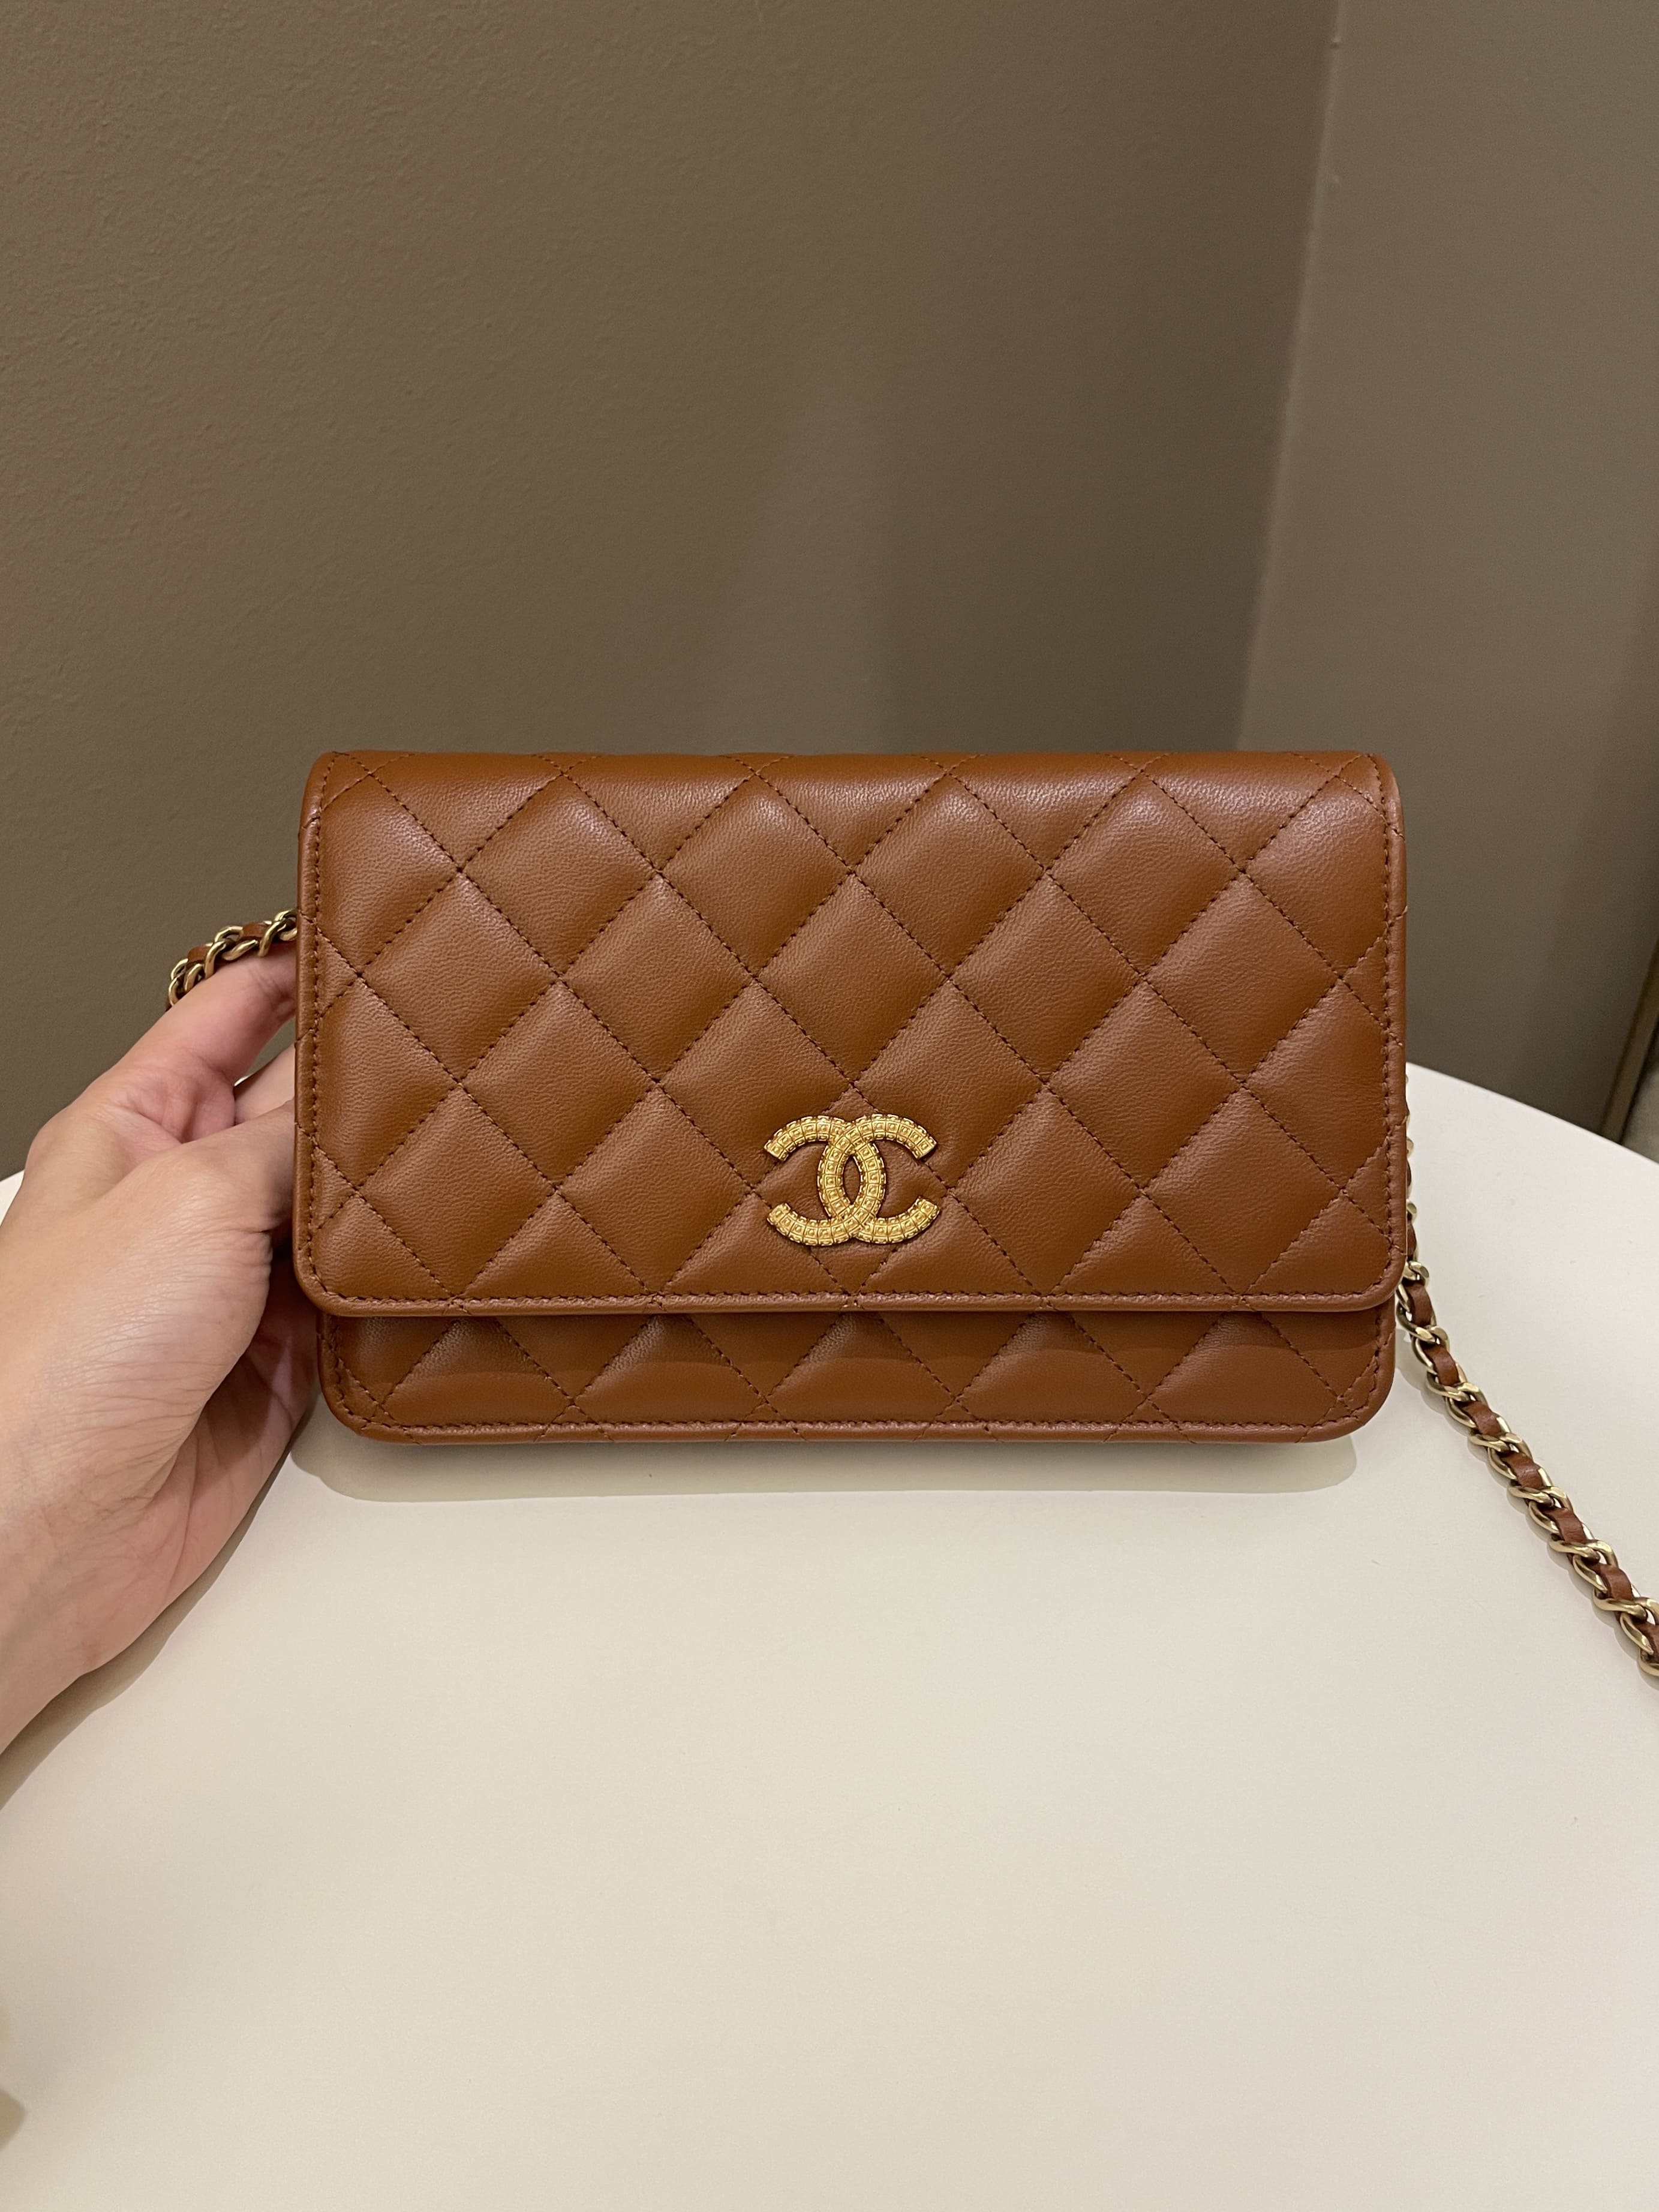 The Best Chanel Handbags Of 2023 For Your Next Collections – Ferbena.com | Chanel  bag outfit, Chanel classic flap bag, Chanel bag